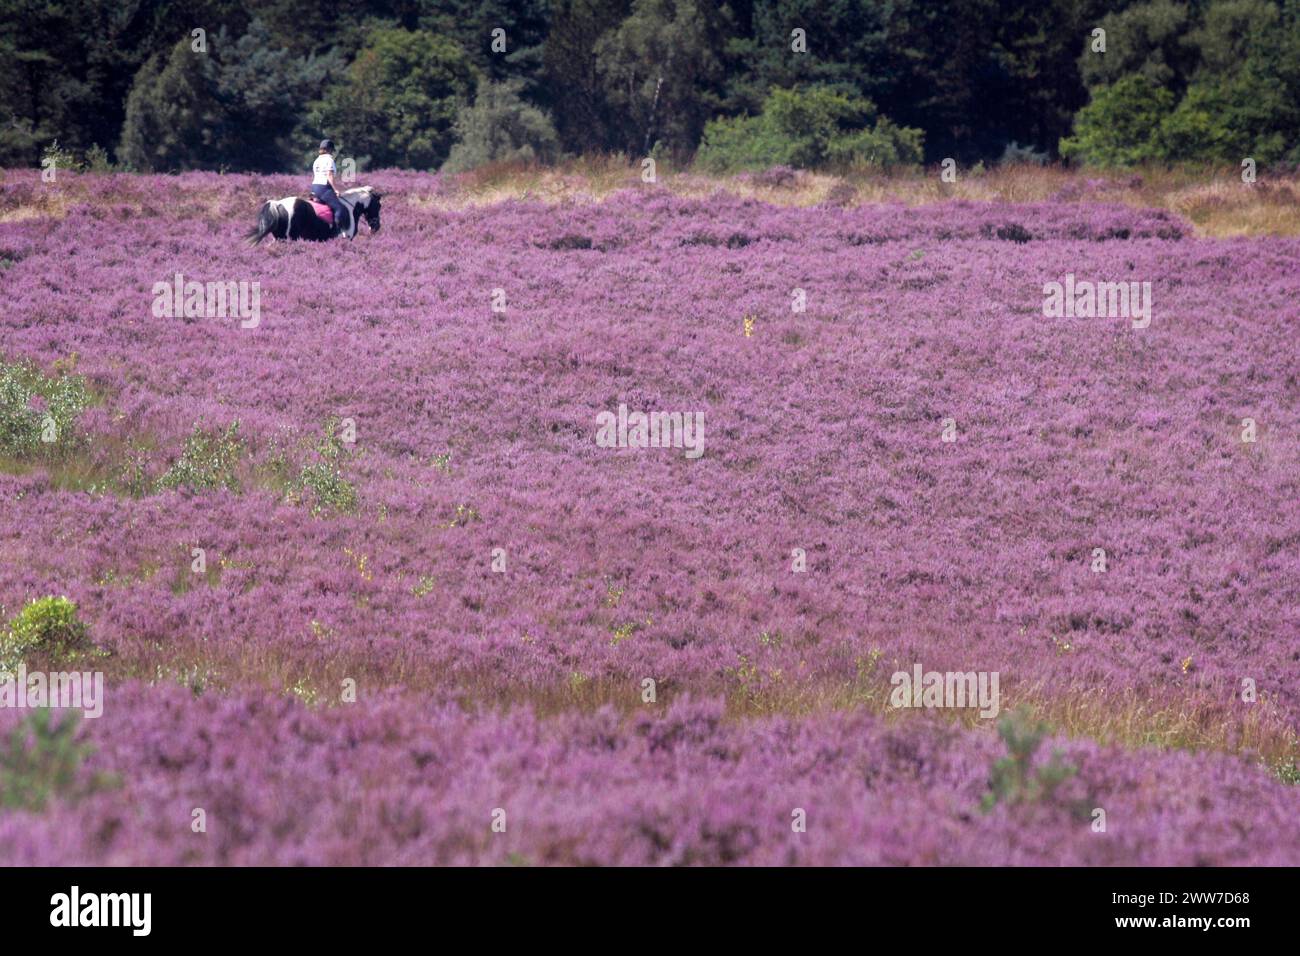 21/08/11..A carpet of bright purple heather covers acres of heathland at Cannock Chase, Staffordshire, today...All Rights Reserved - F Stop Press (For Stock Photo